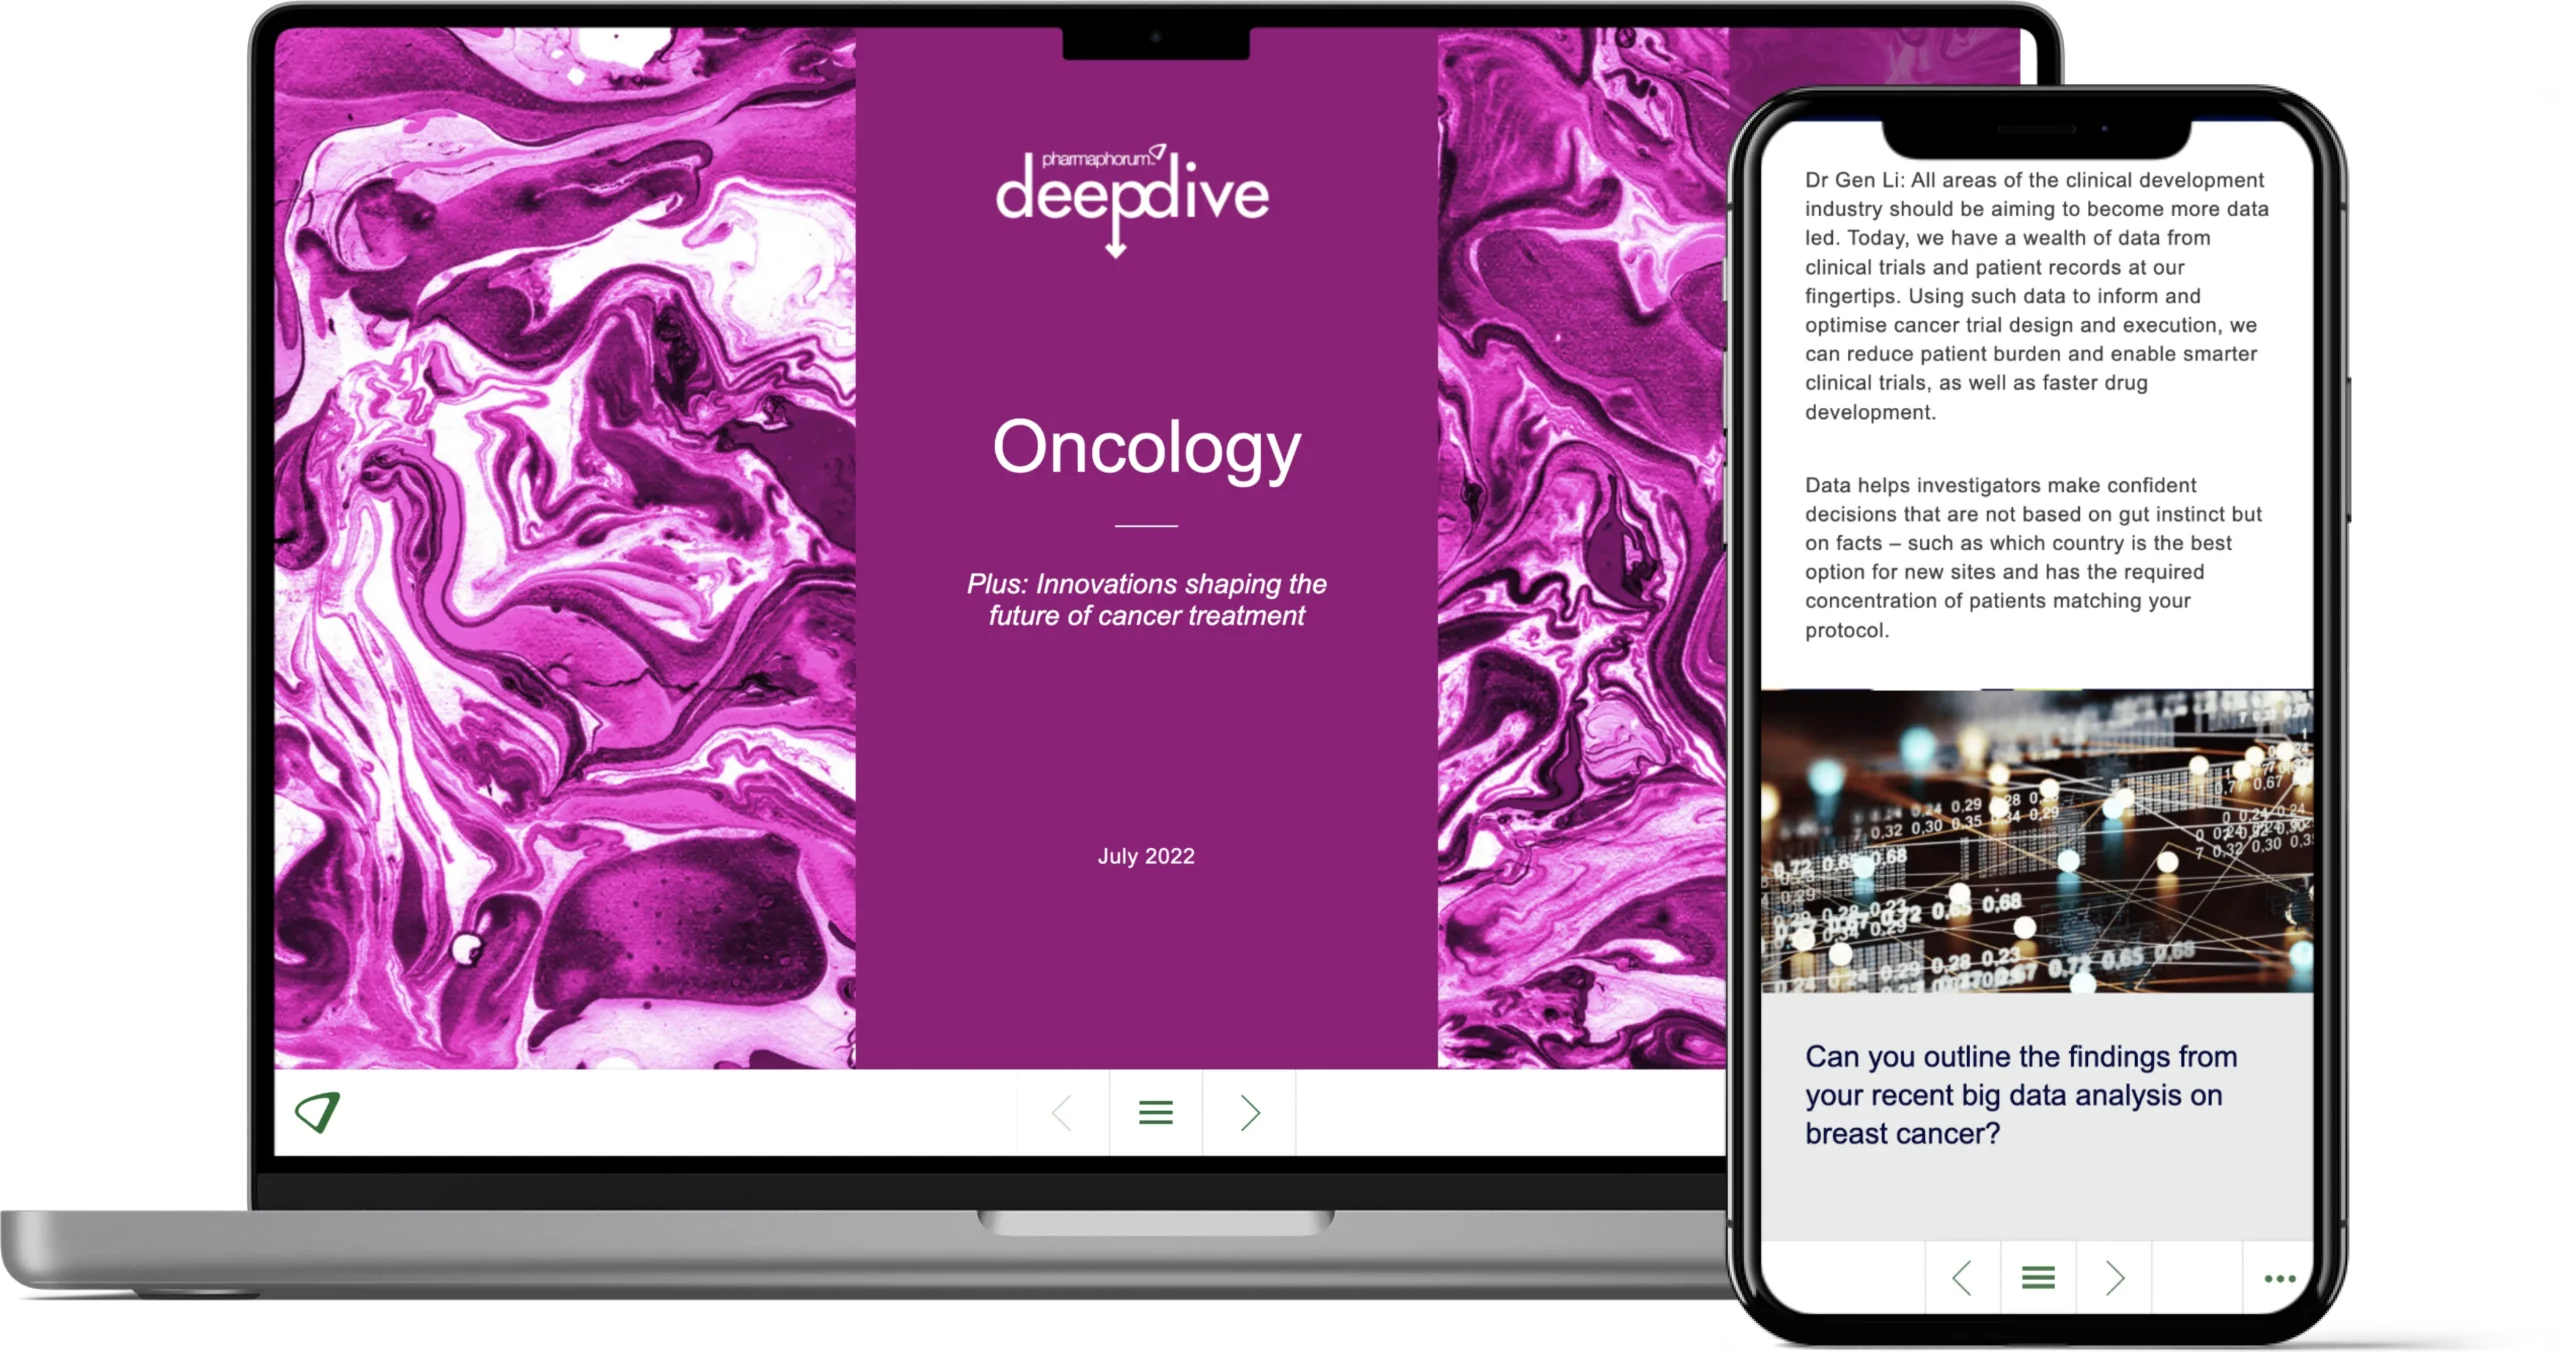 Deepdive – Oncology 2022